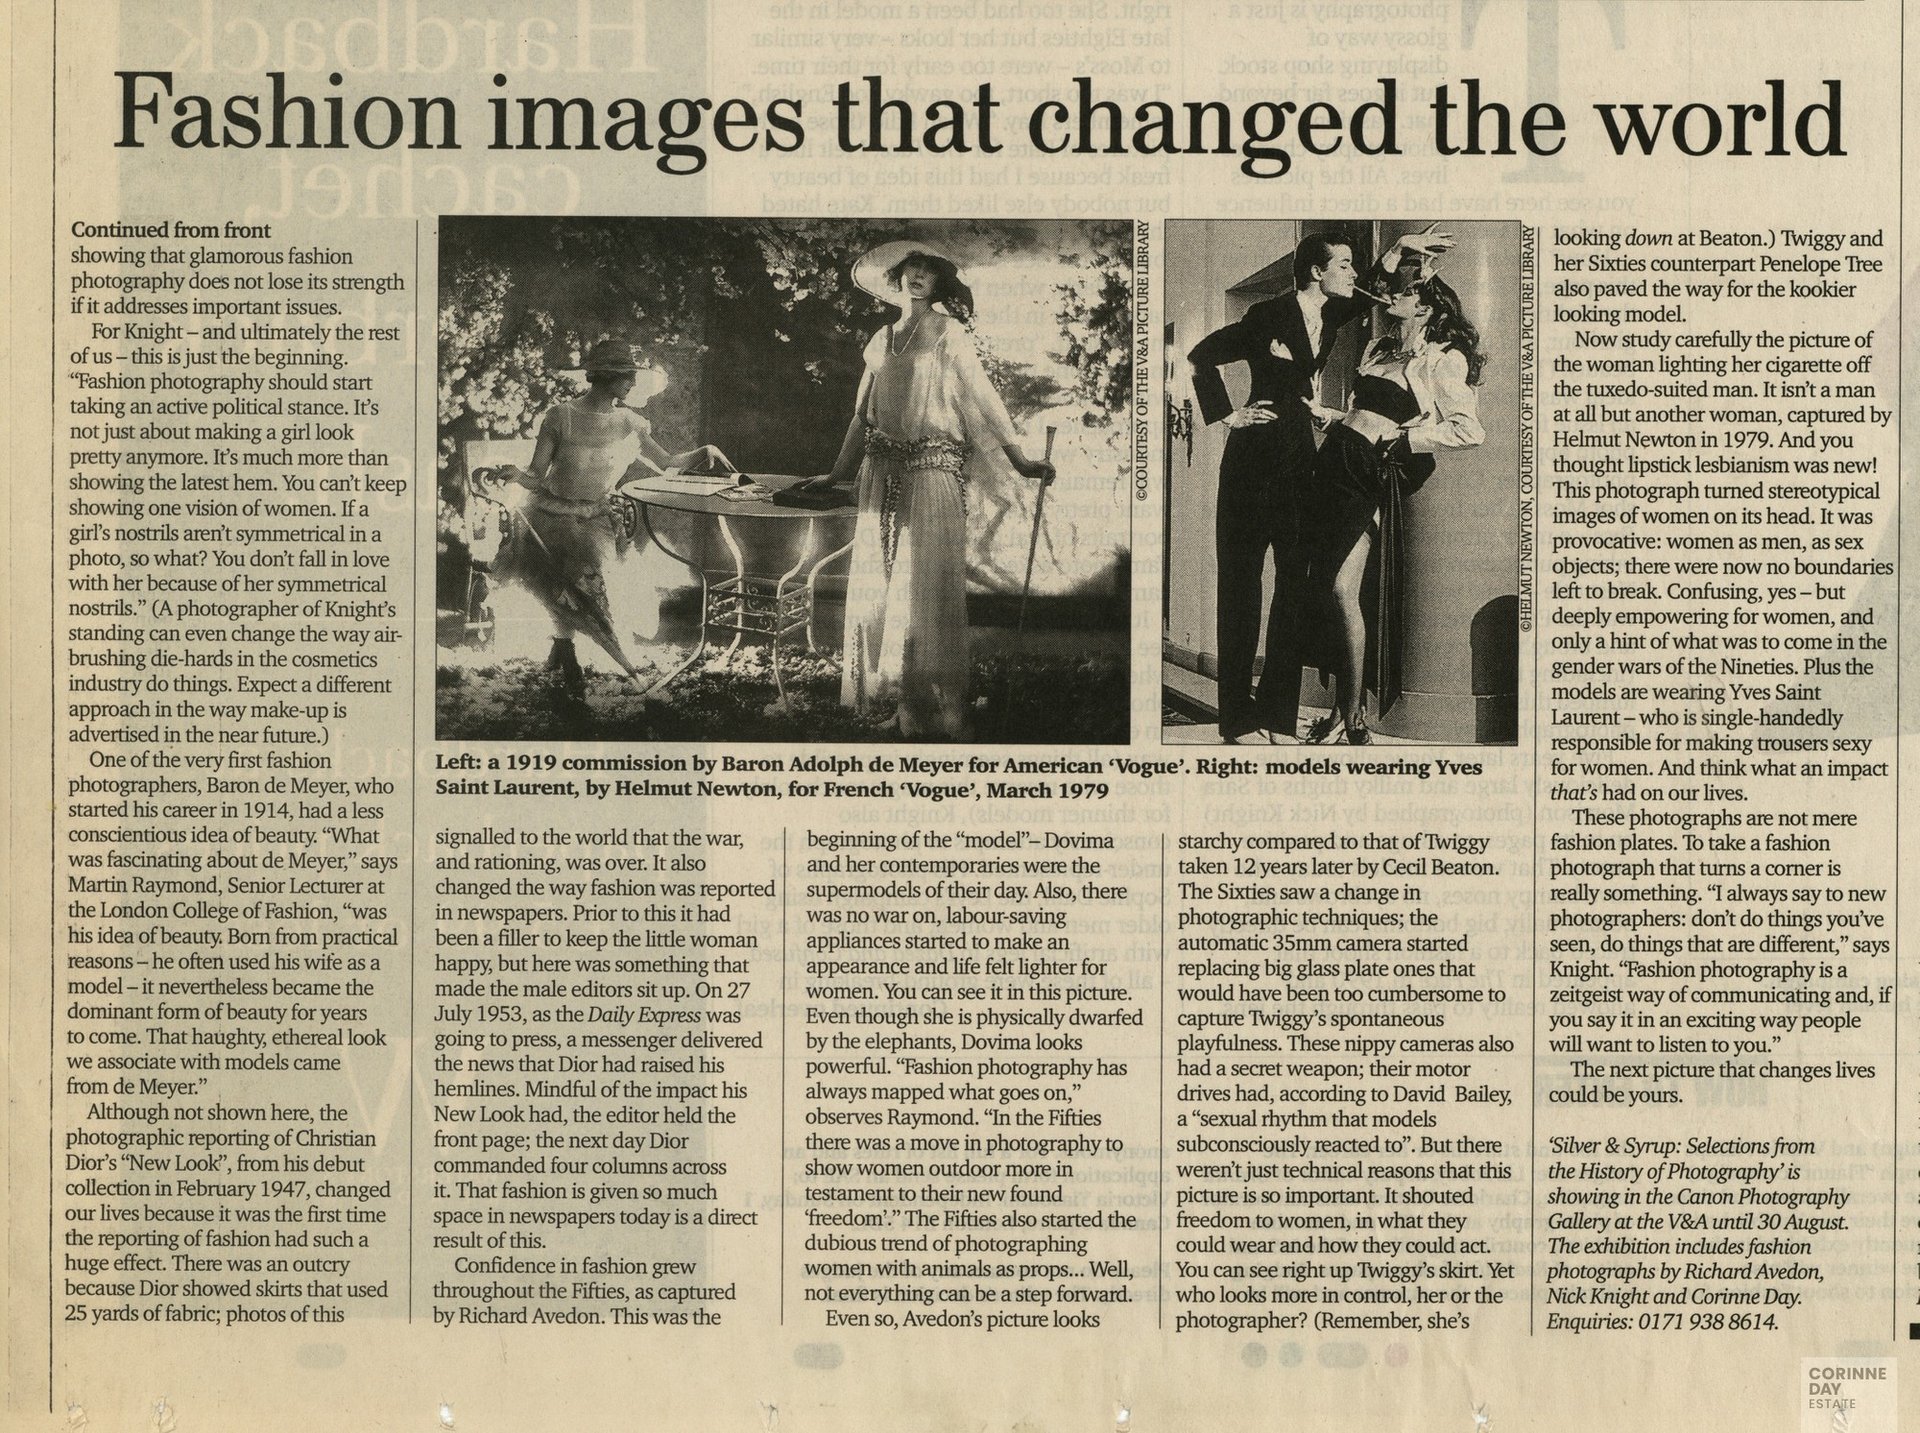 These fashion images changed the world. Could yours do the same?, The Independnent on Sunday, 28 Mar 1999 — Image 3 of 3